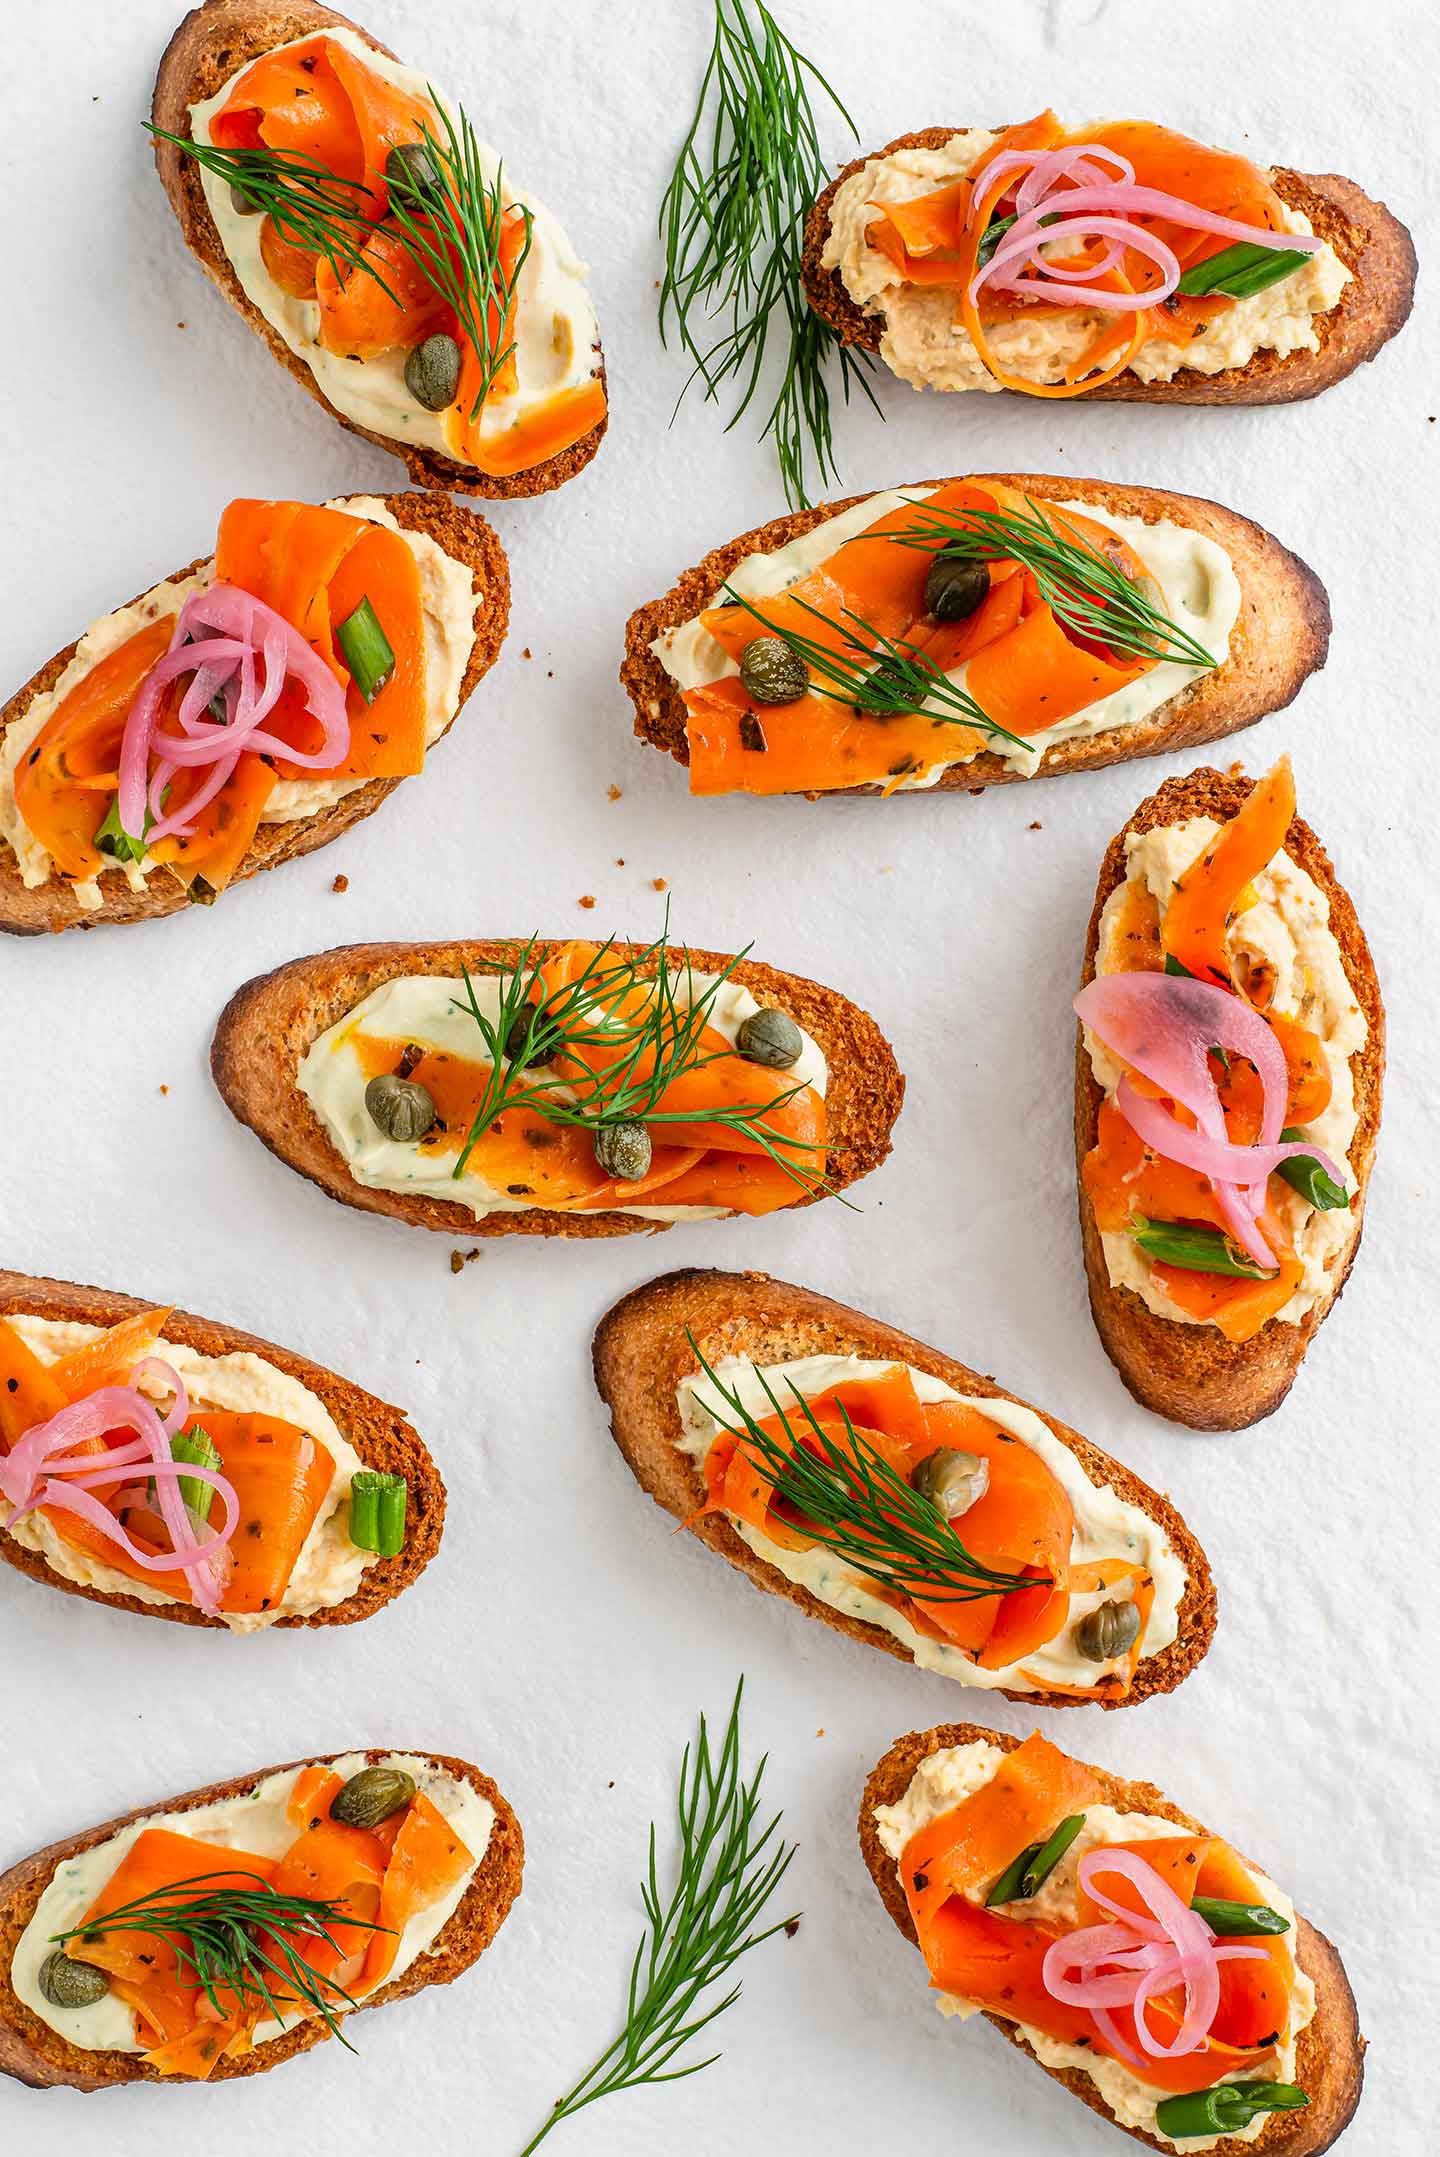 Top down view of smoky carrot lox appetizer displayed on a white tray. Crostini's are topped with dill spread, hummus, carrot lox, dill, capers, and pickled onion.